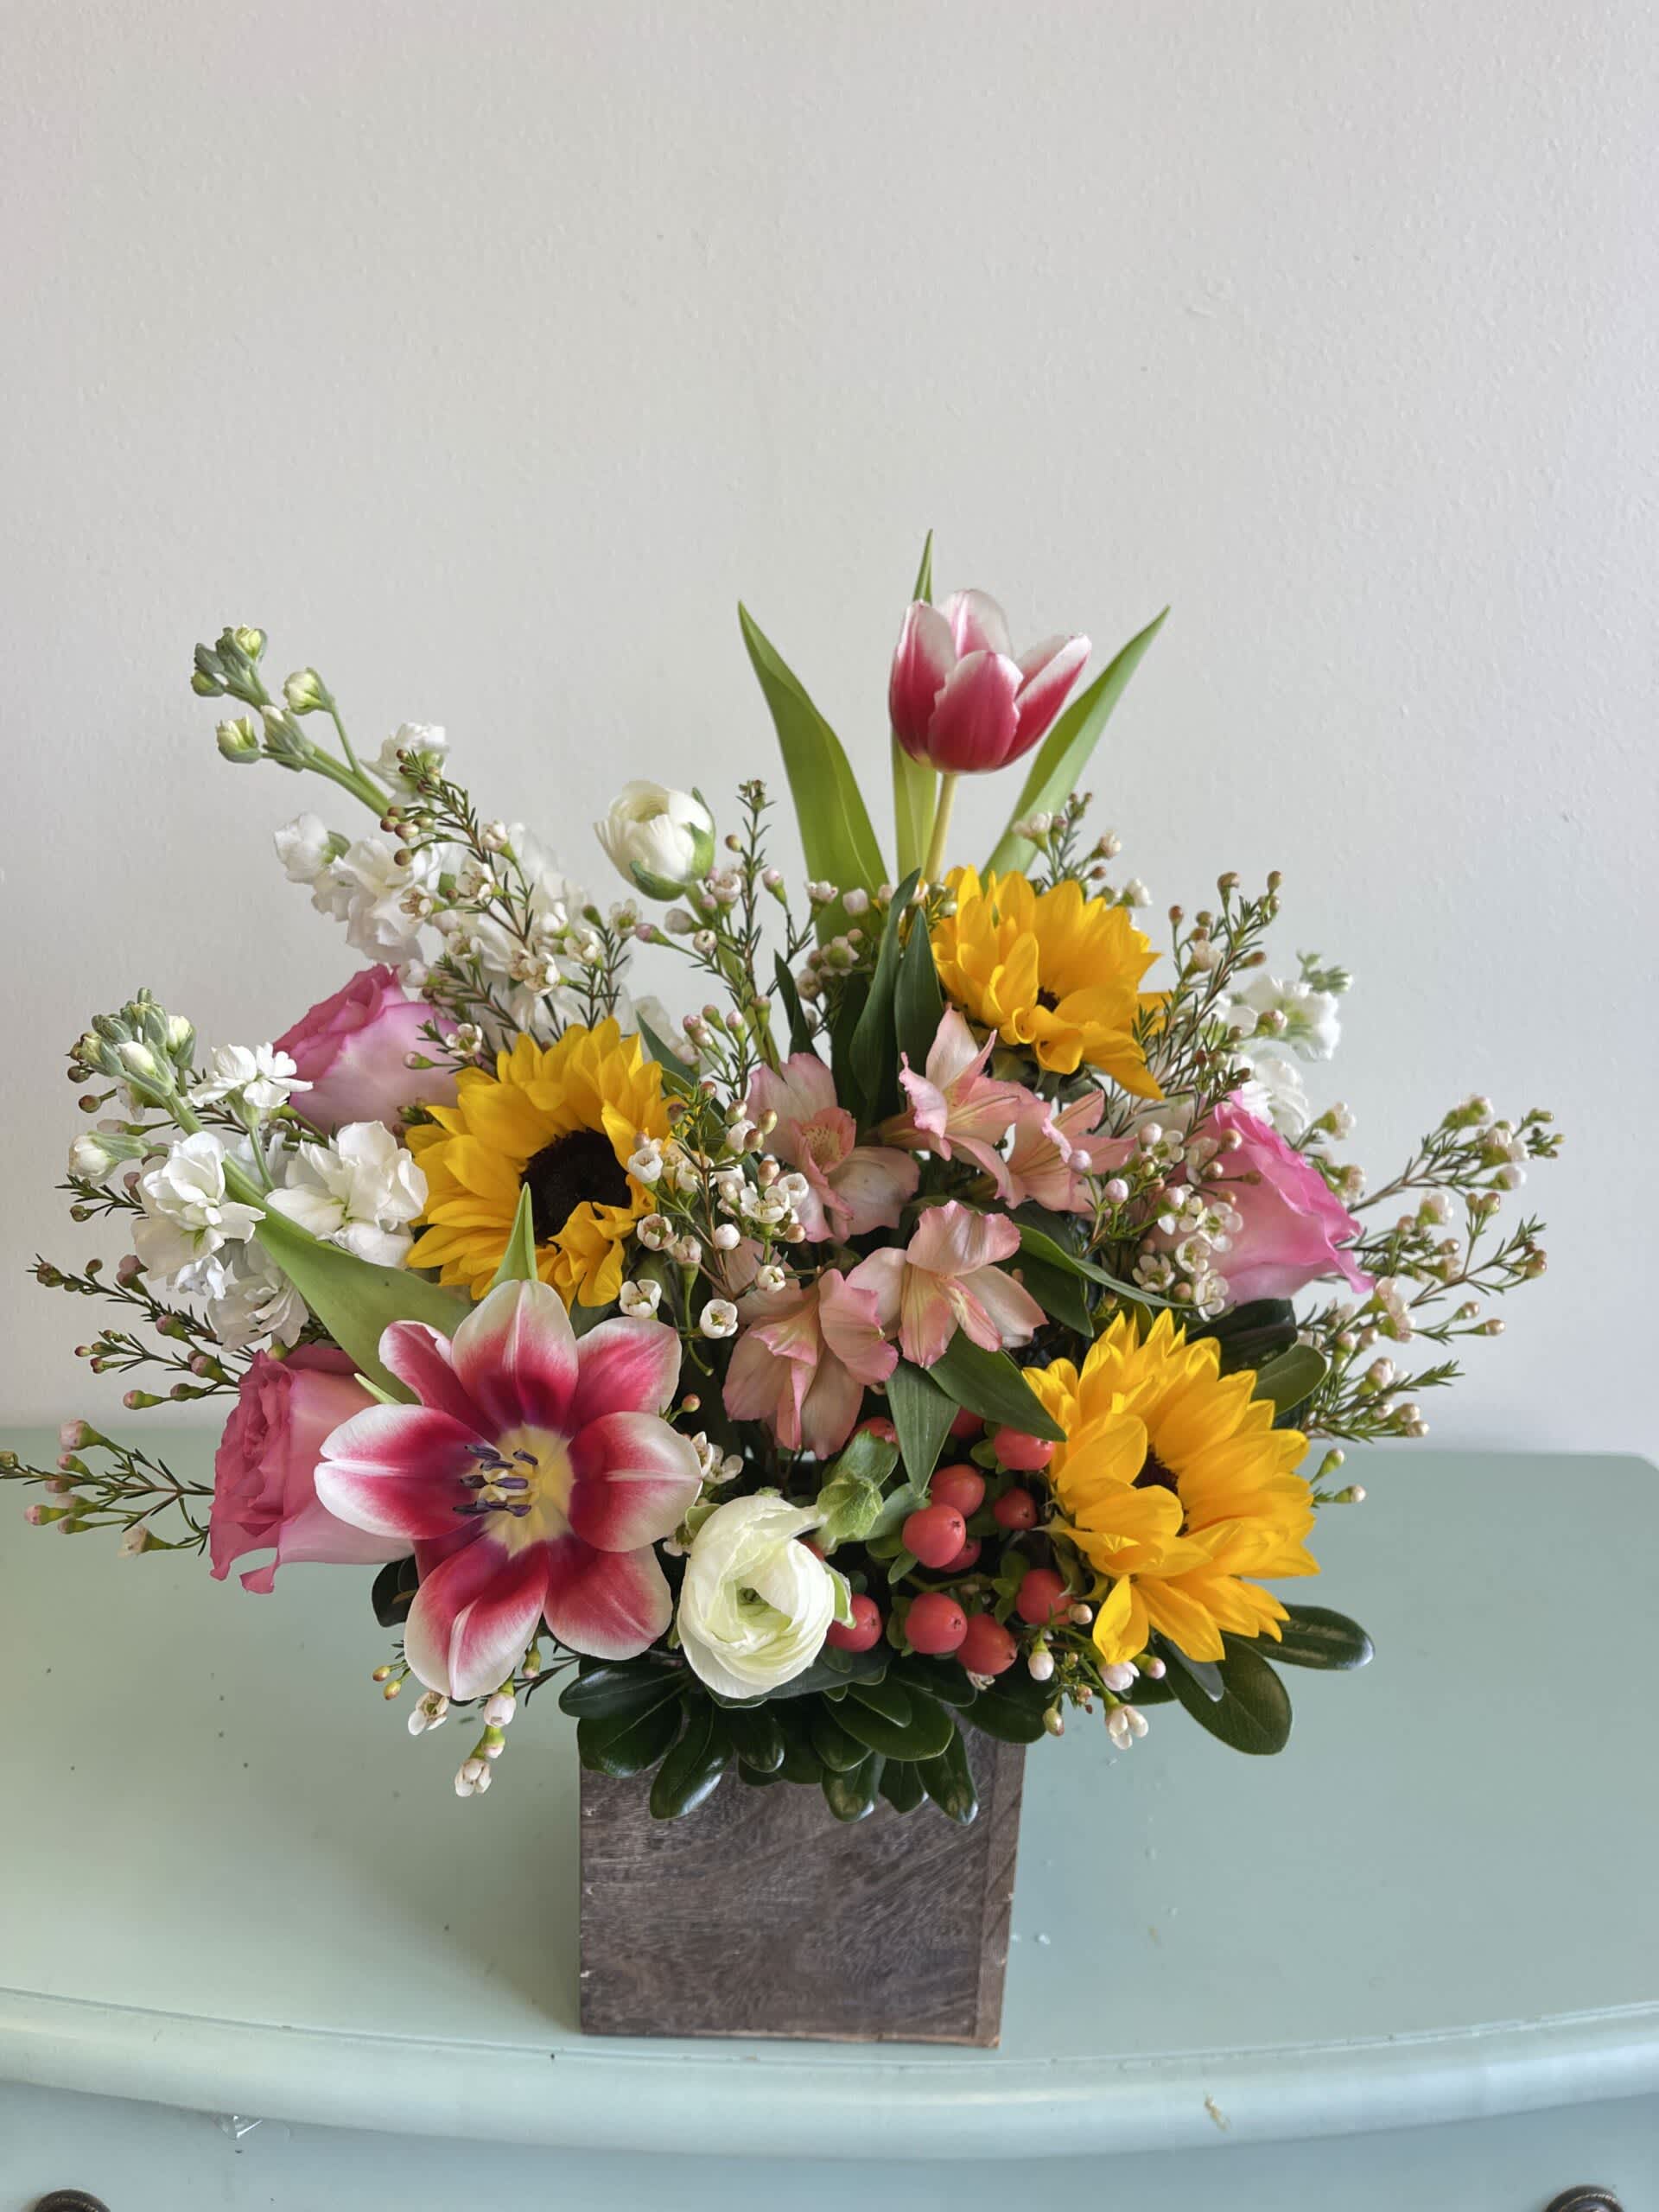 Garden of Love - *ONLY AVAIALBE FEBURARY 12-14TH AND WHILE SUPPLIES LAST*  For the wildflower lover in your life! An arrangement of ranunculus, tulips, sunflowers, roses and other complimentary flowers.